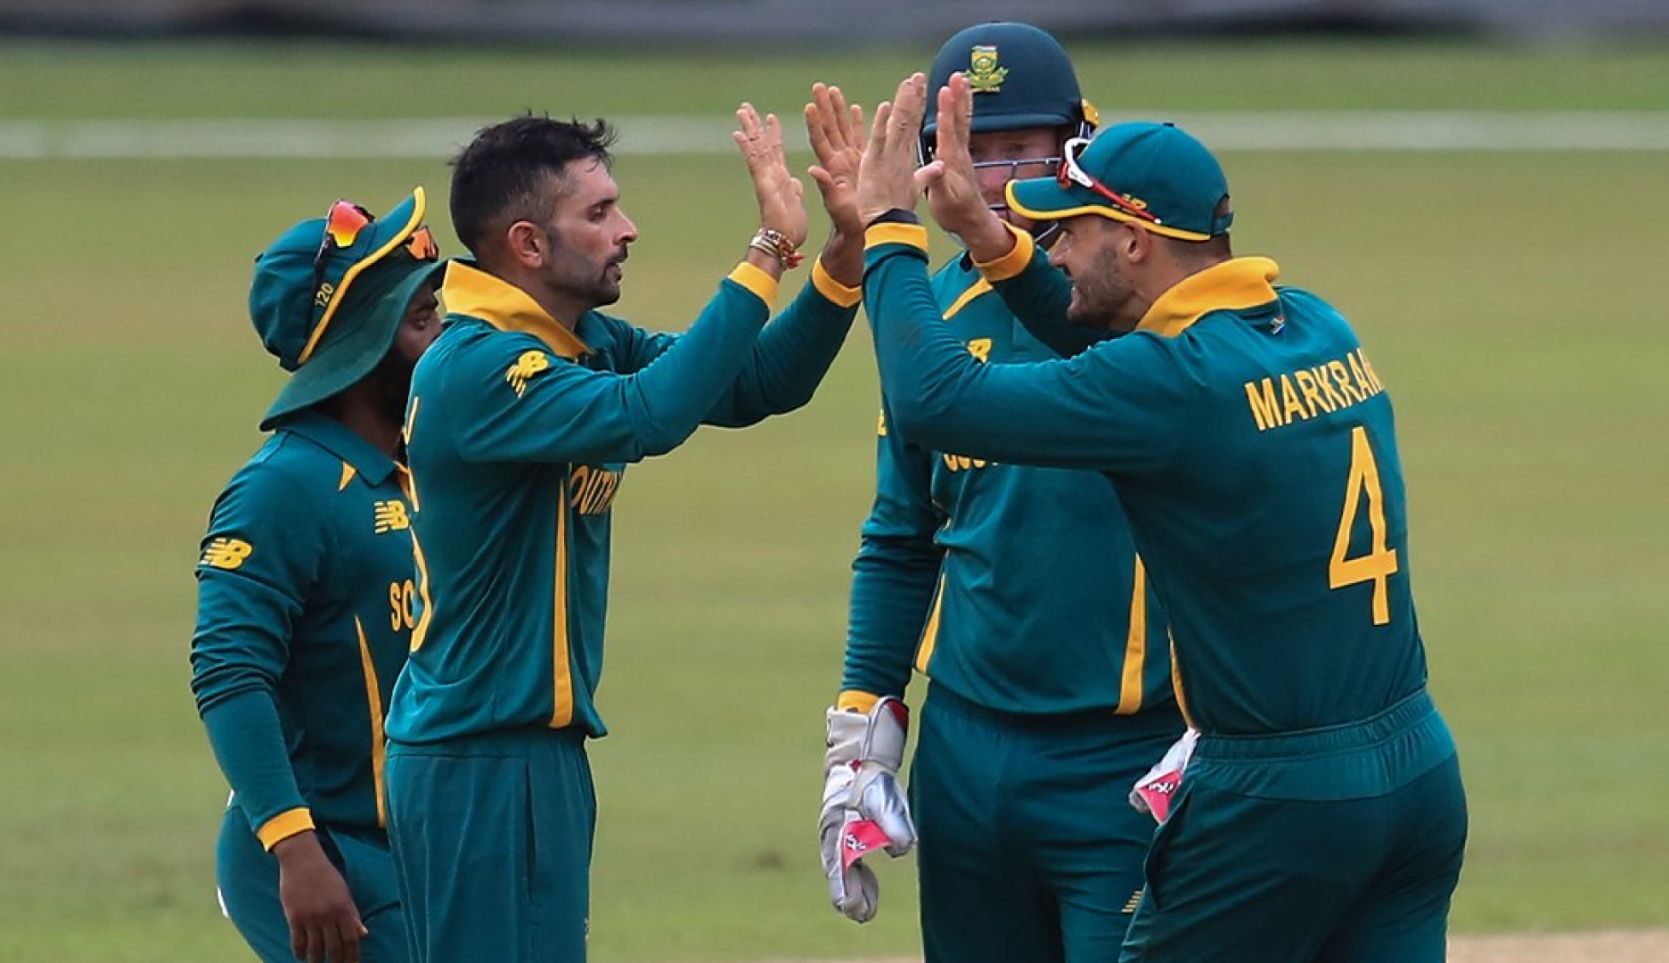 Keshav Maharaj to lead South Africa in remaining ODIs after Temba ruled out with injury